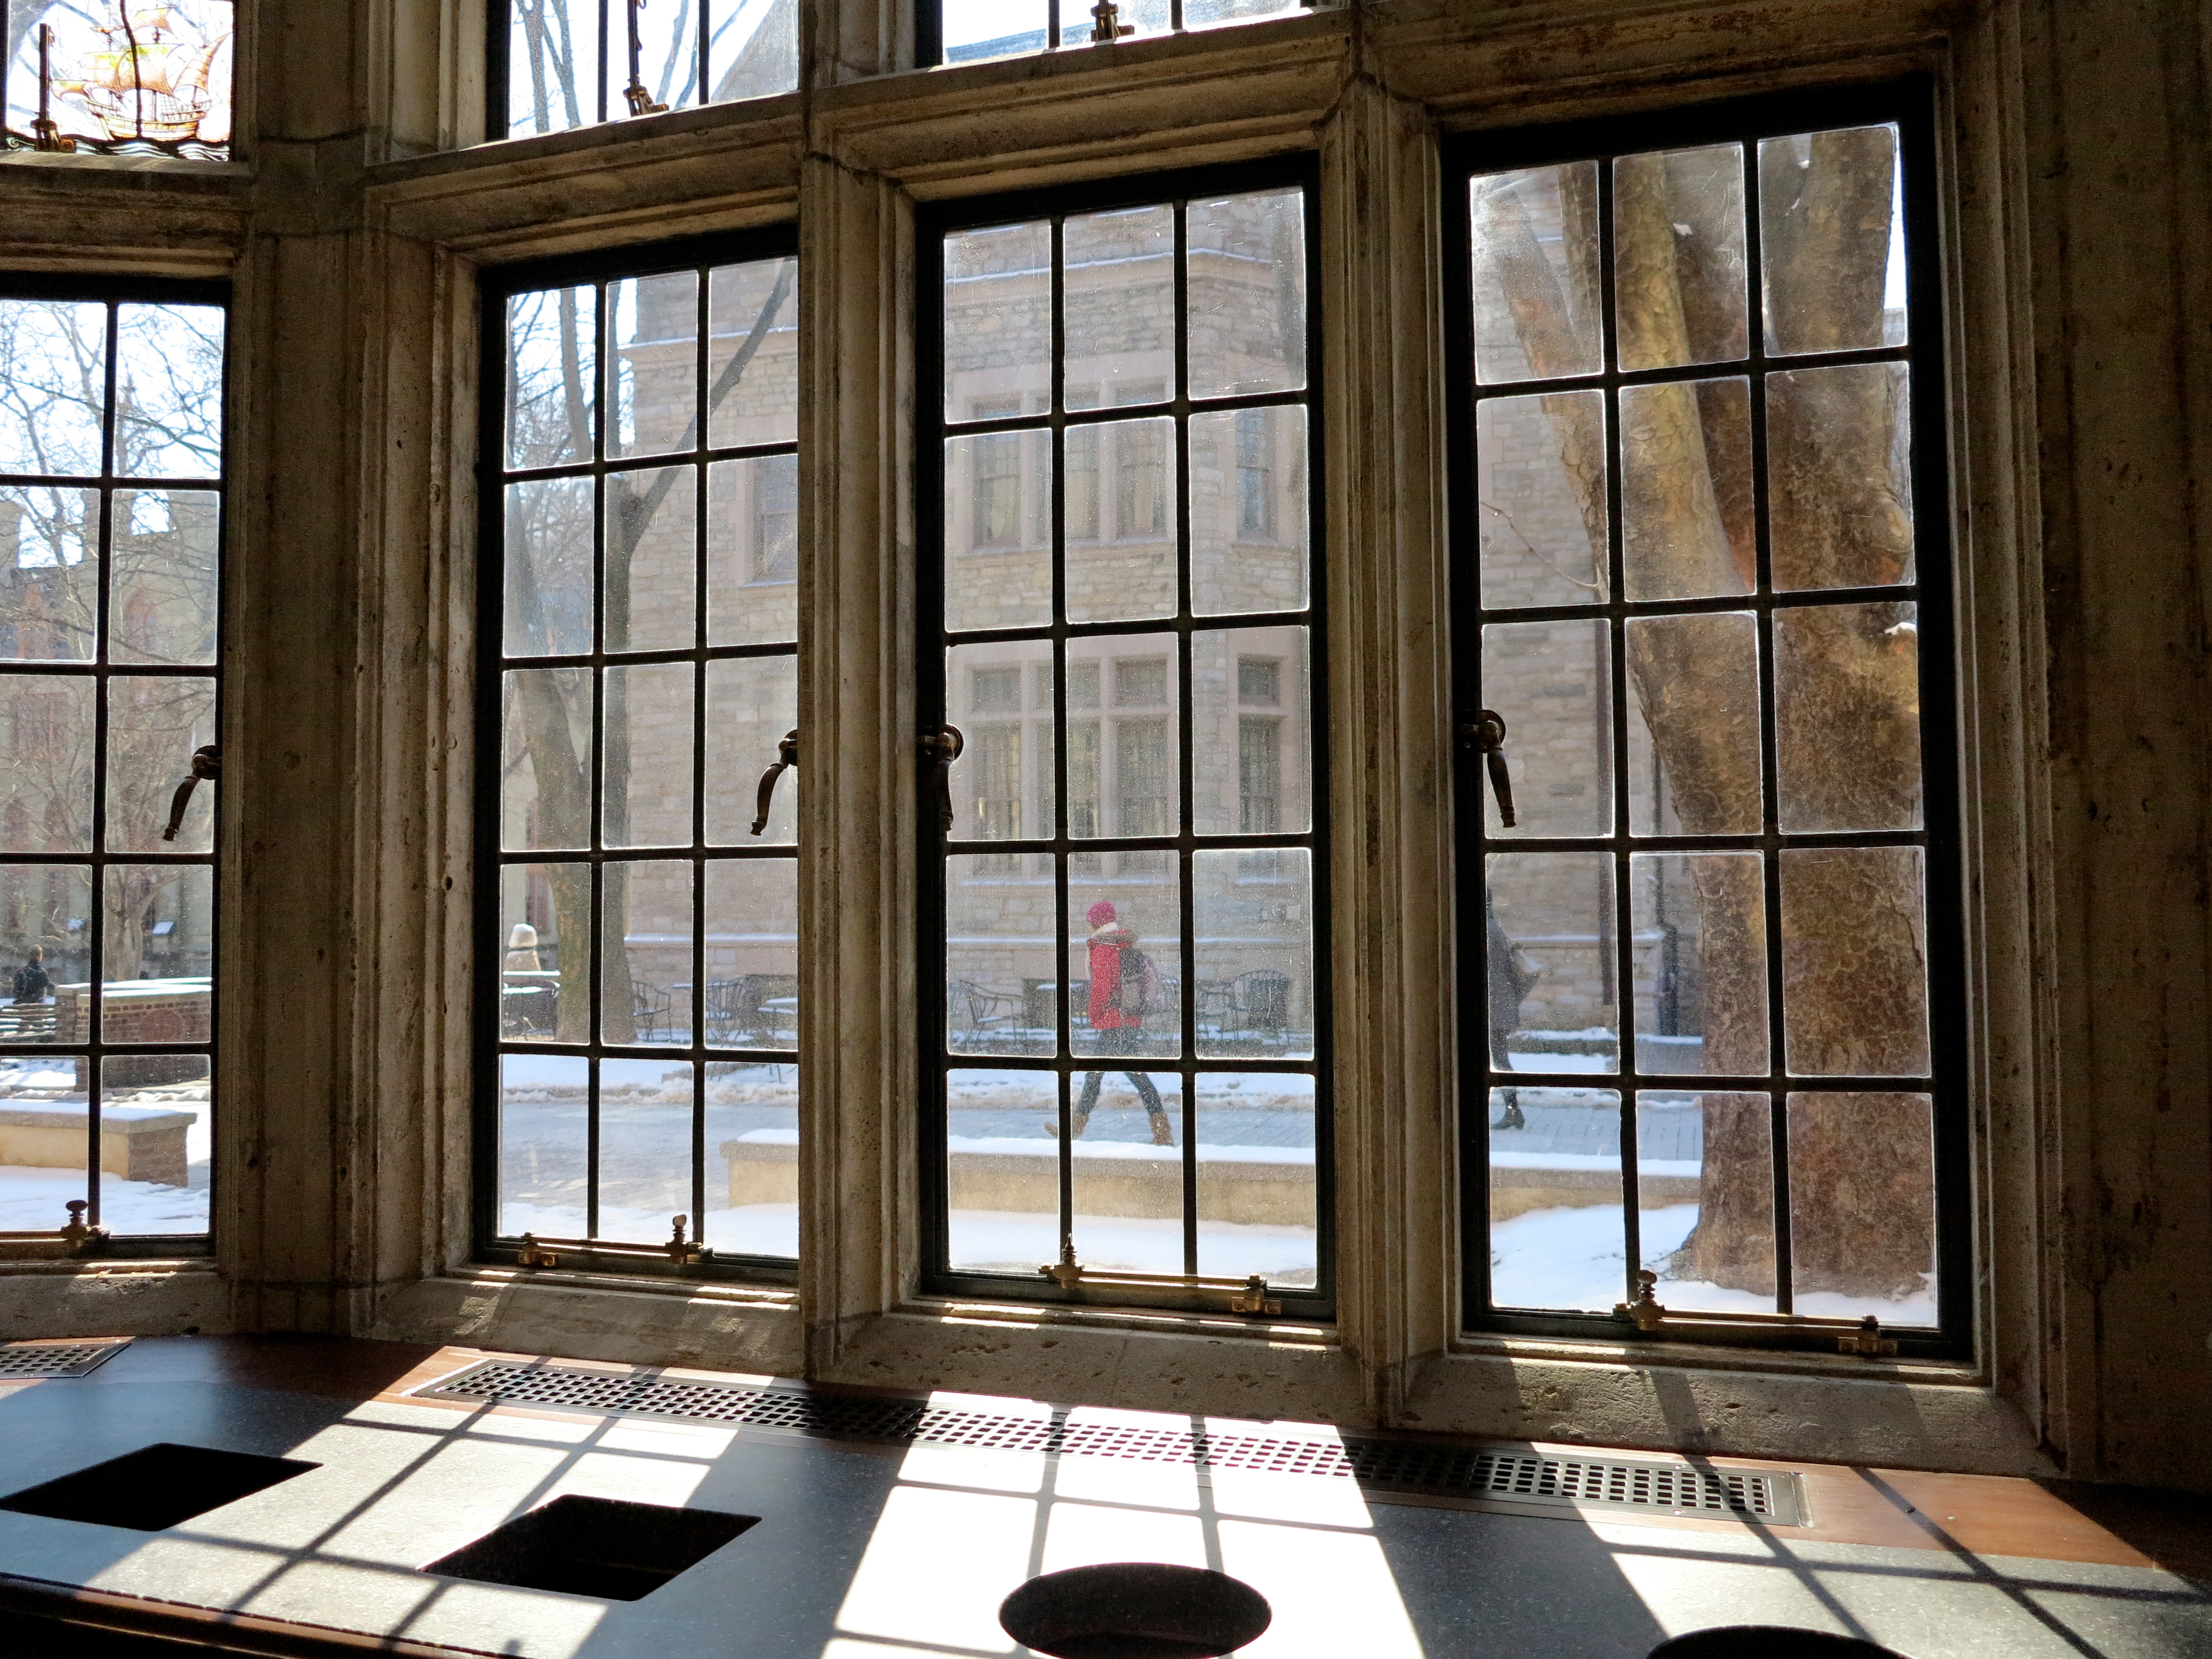 Historic leaded glass windows were restored and let light stream in.